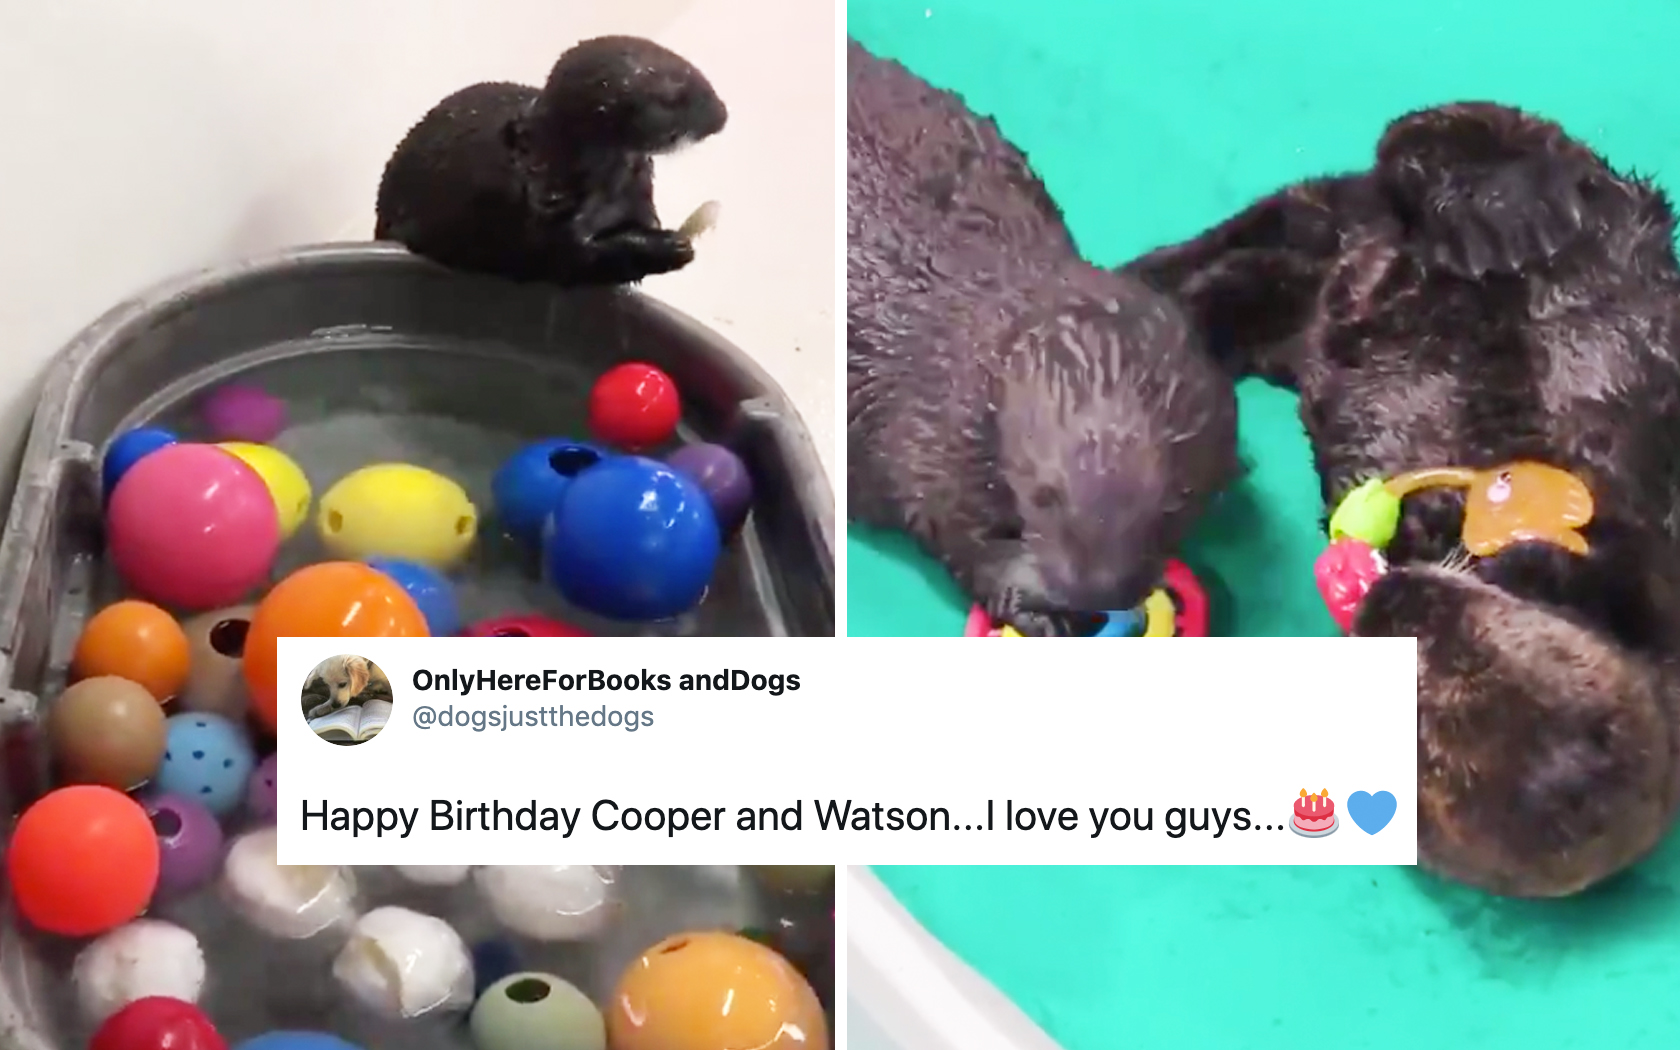 Shedd Aquarium Threw A Birthday Party For Two Otters And It's So Cute